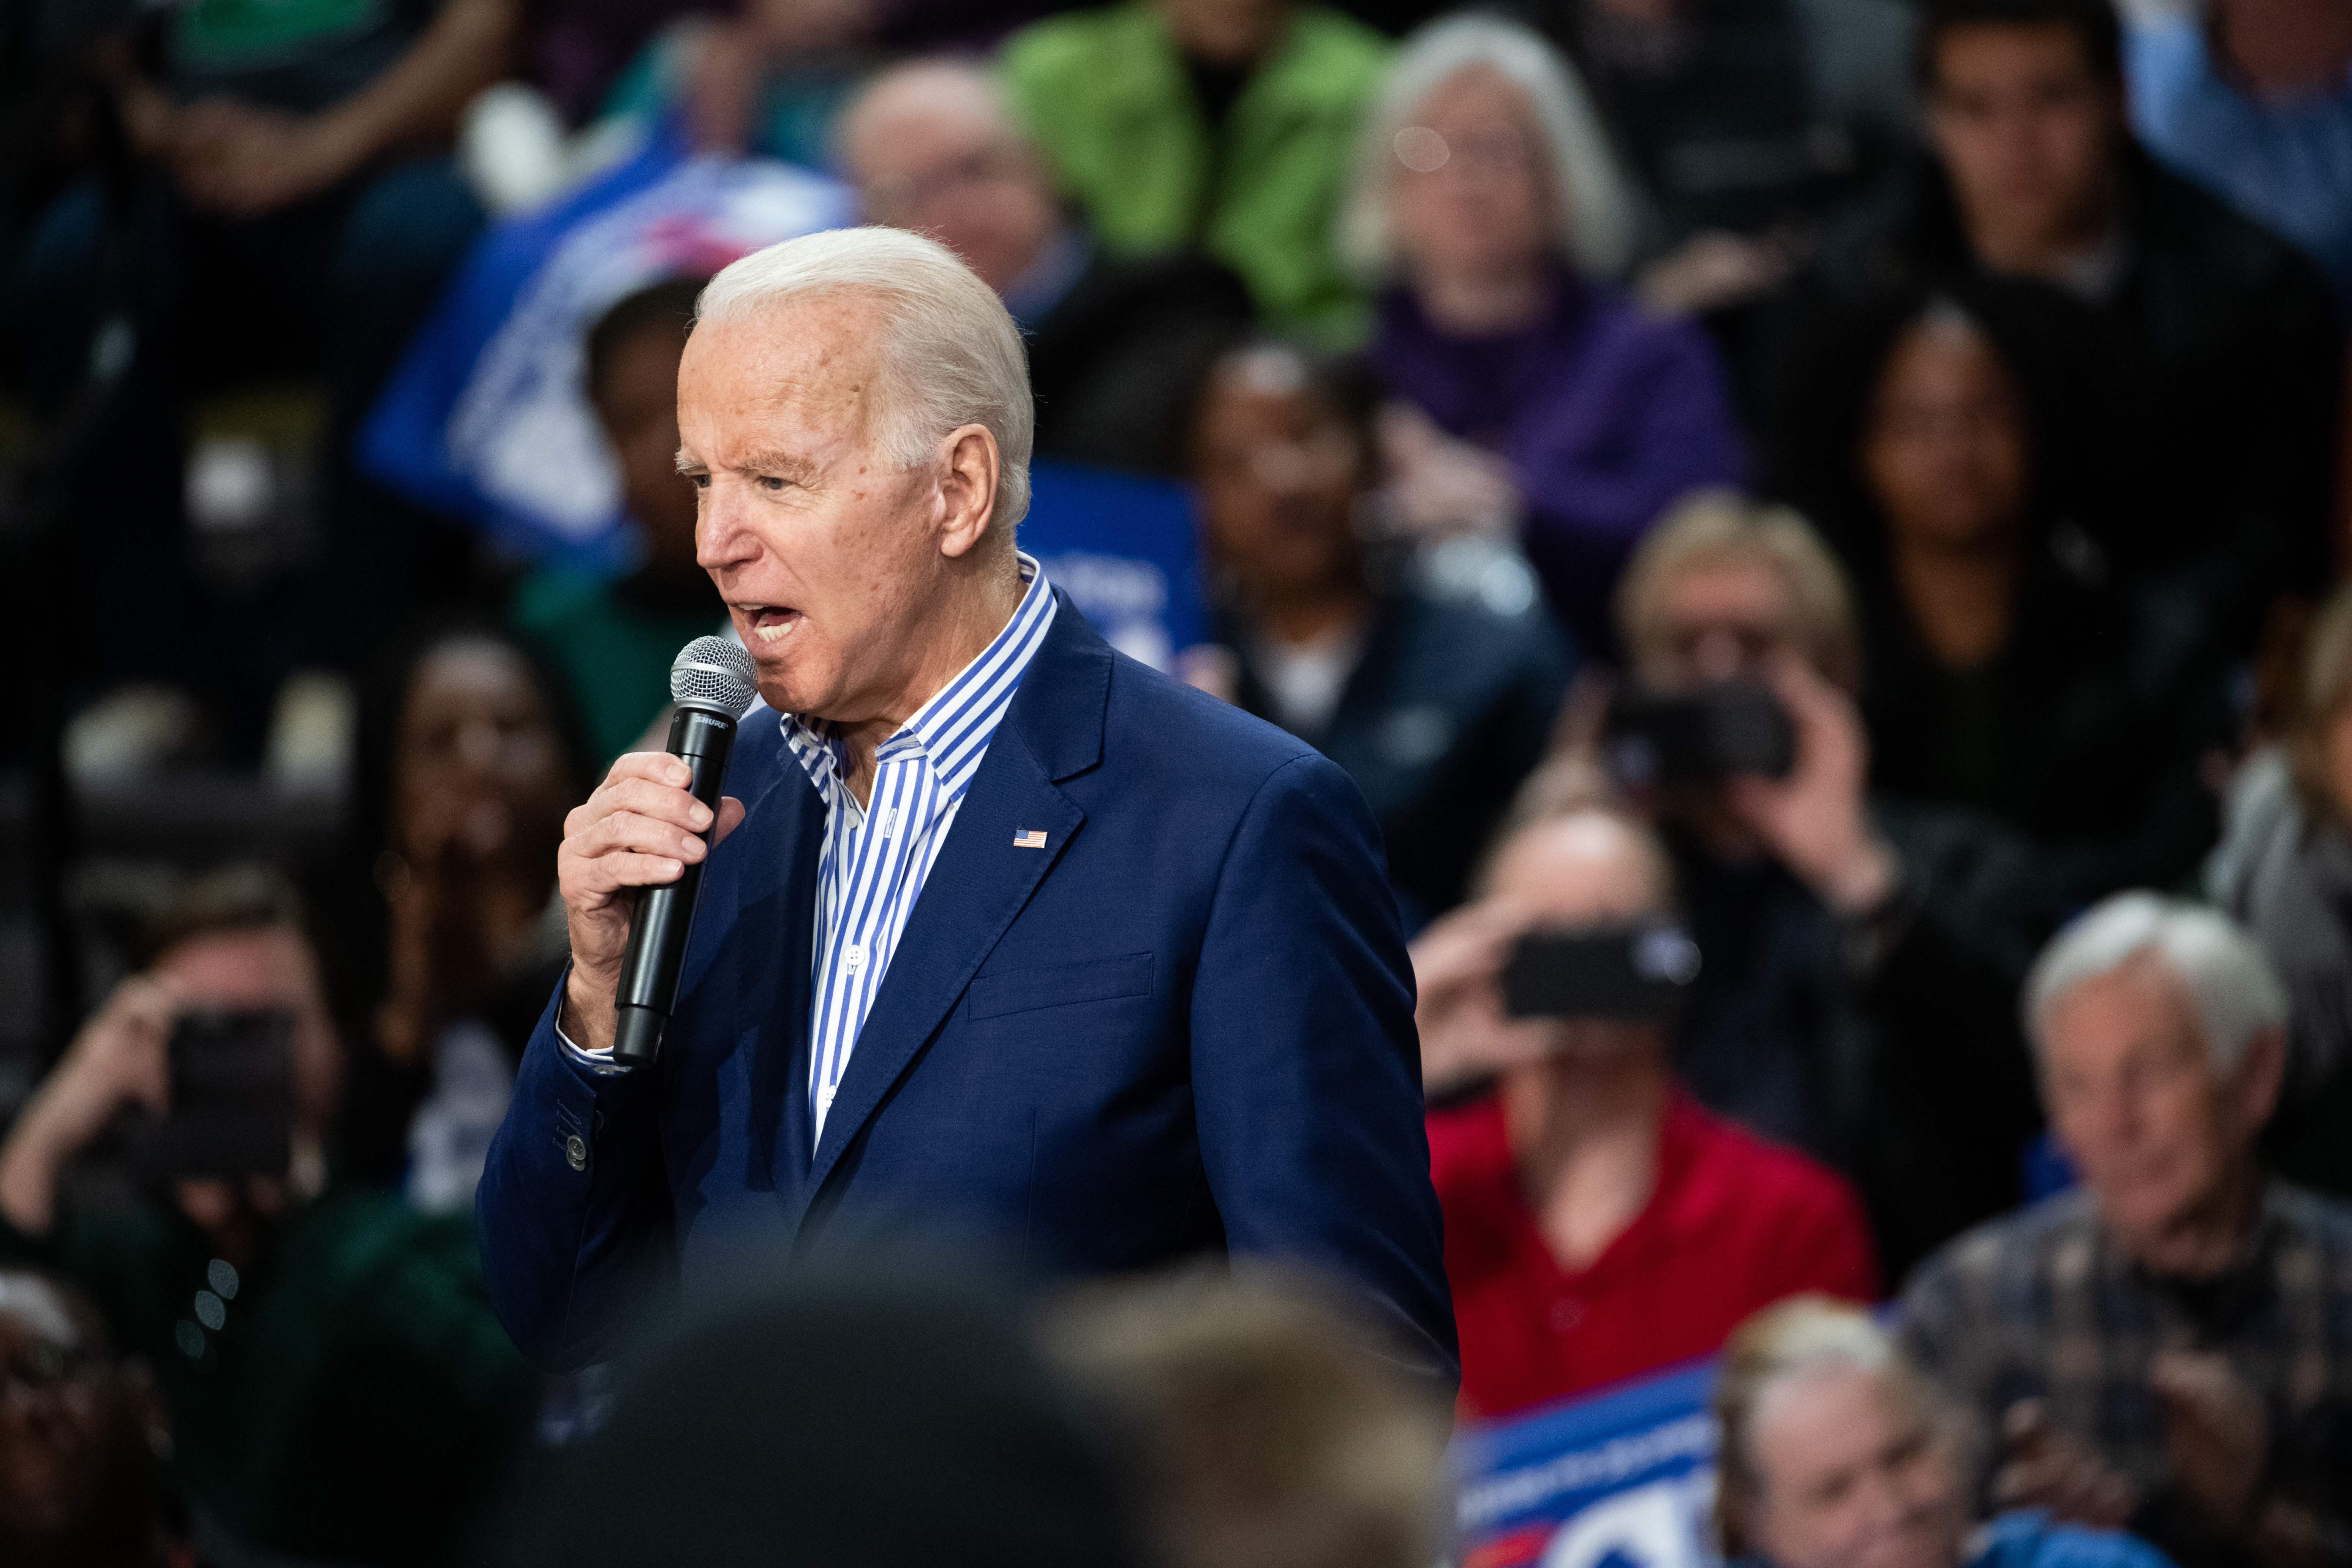 SPARTANBURG, SC - FEBRUARY 28: Democratic presidential candidate former Vice President Joe Biden addresses a crowd during a campaign event at Wofford University February 28, 2020 in Spartanburg, South Carolina. South Carolinians will vote in the Democratic presidential primary tomorrow. (Photo by Sean Rayford/Getty Images)